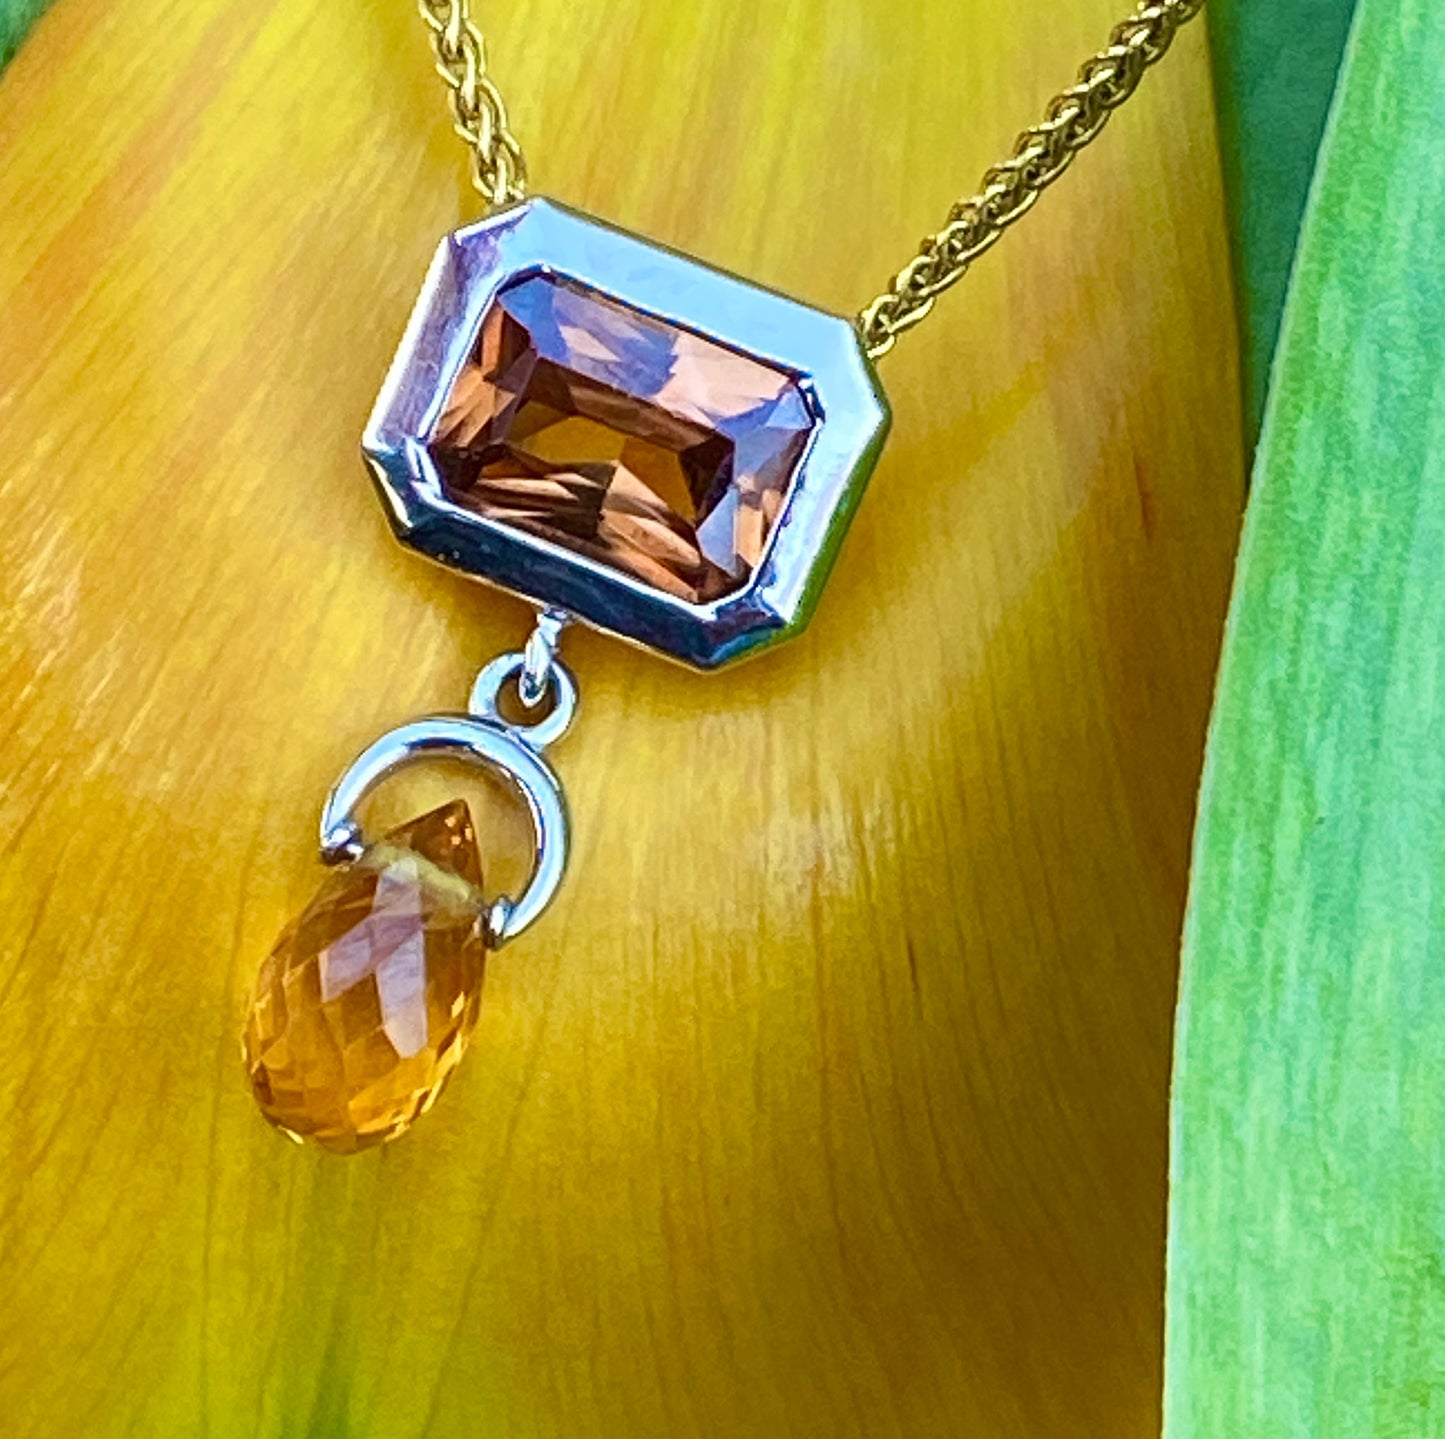 .70 Yellow Sapphire and Briolette Pendant